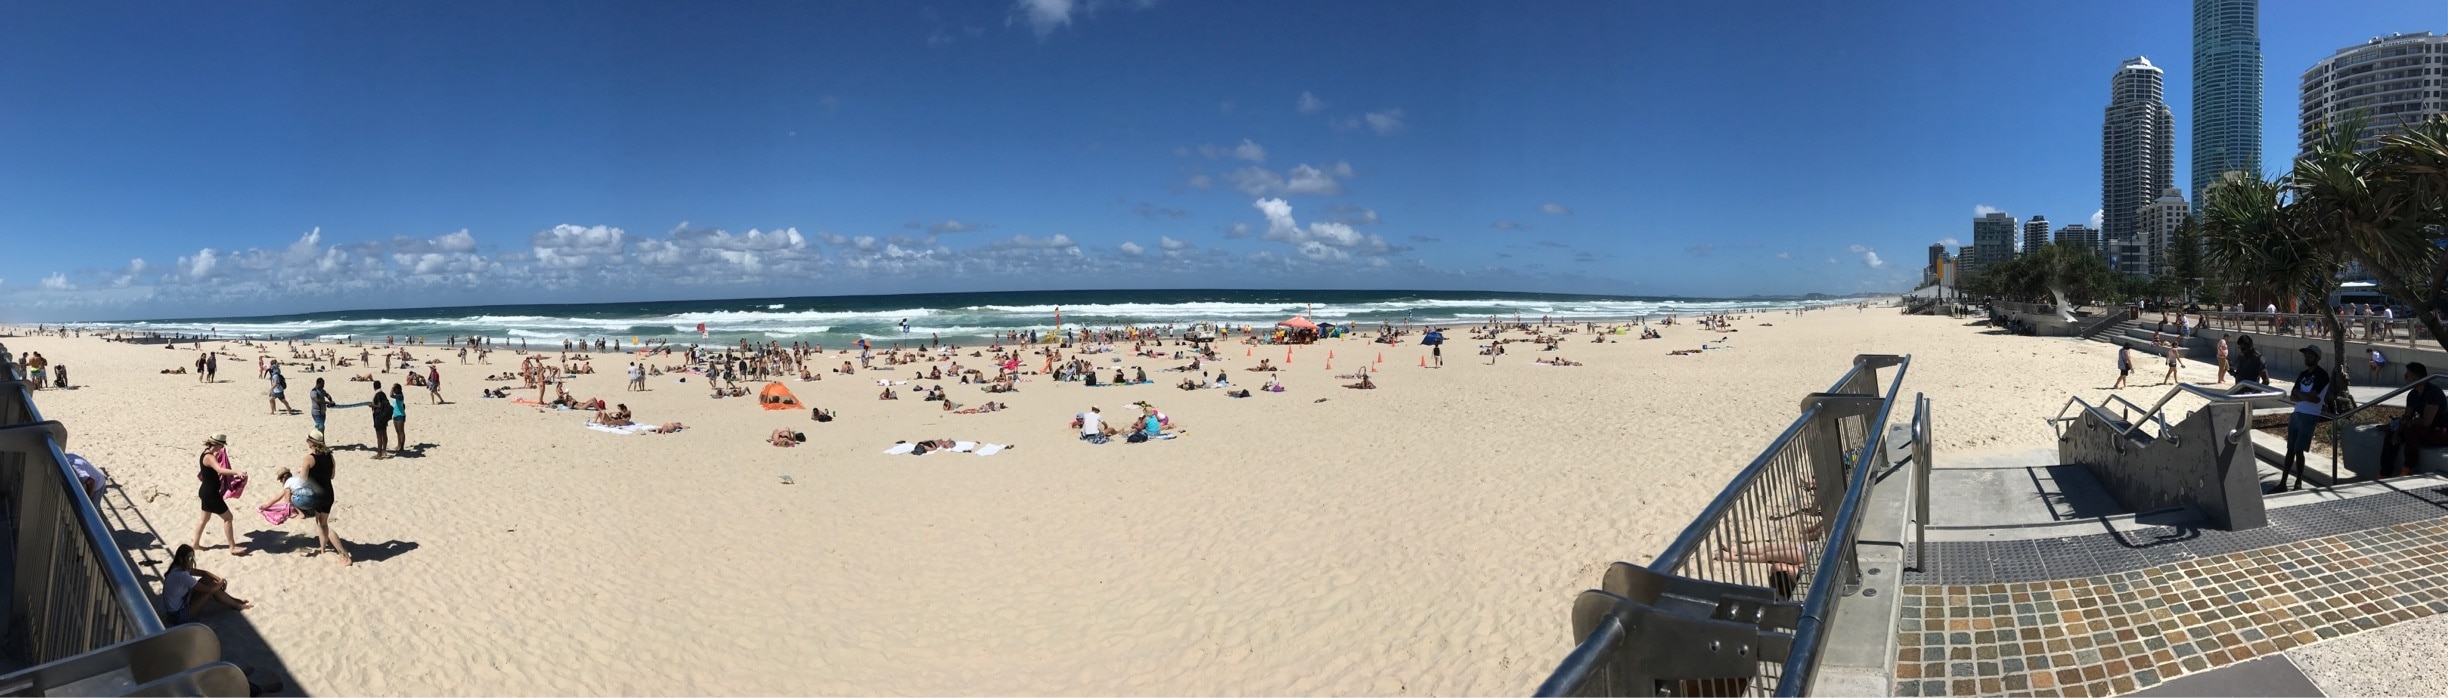 Not surprisingly, Surfers Paradise is the most visited Gold Coast